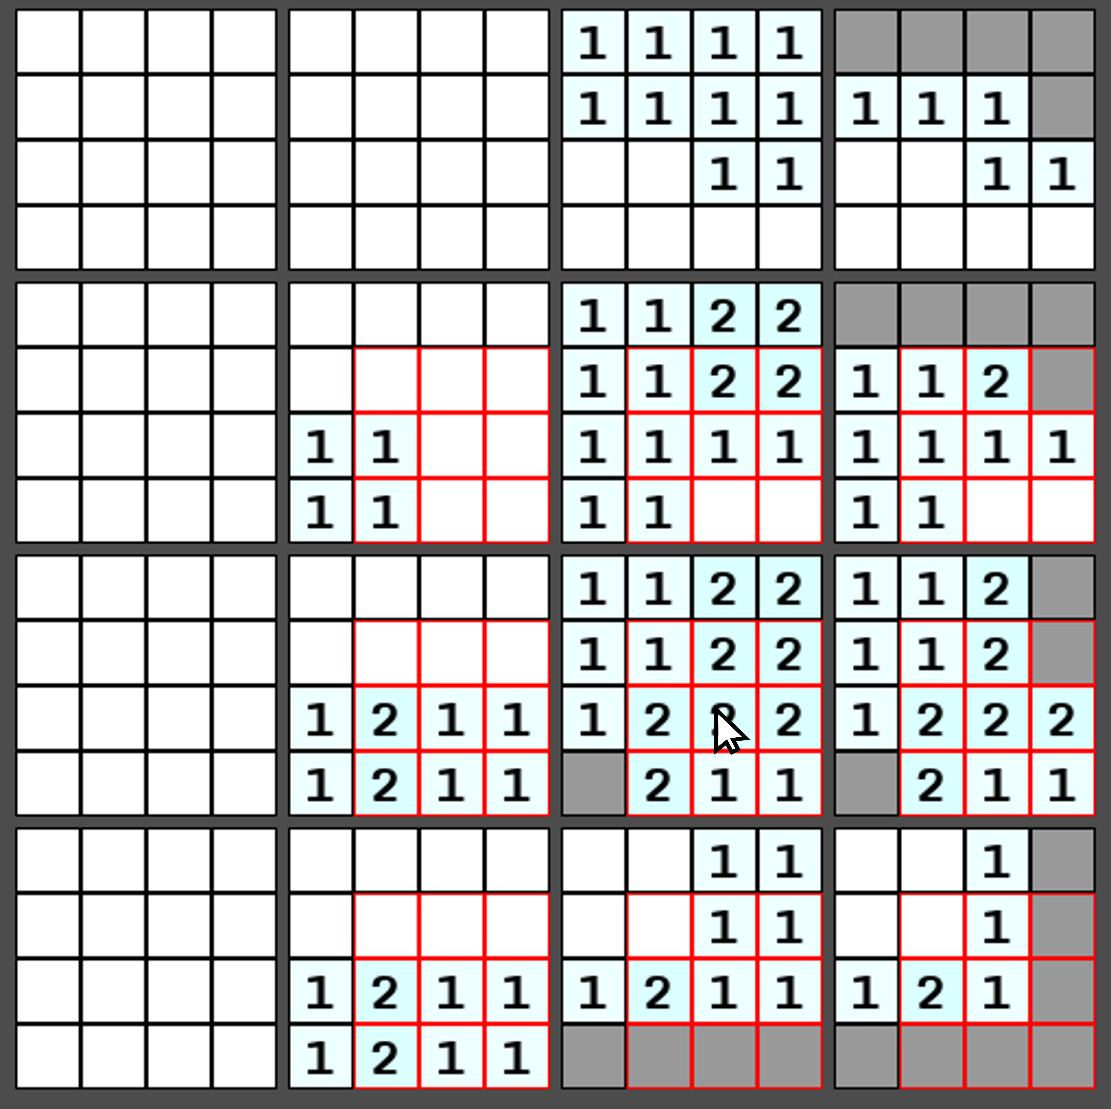 Game of 4DMinesweeper